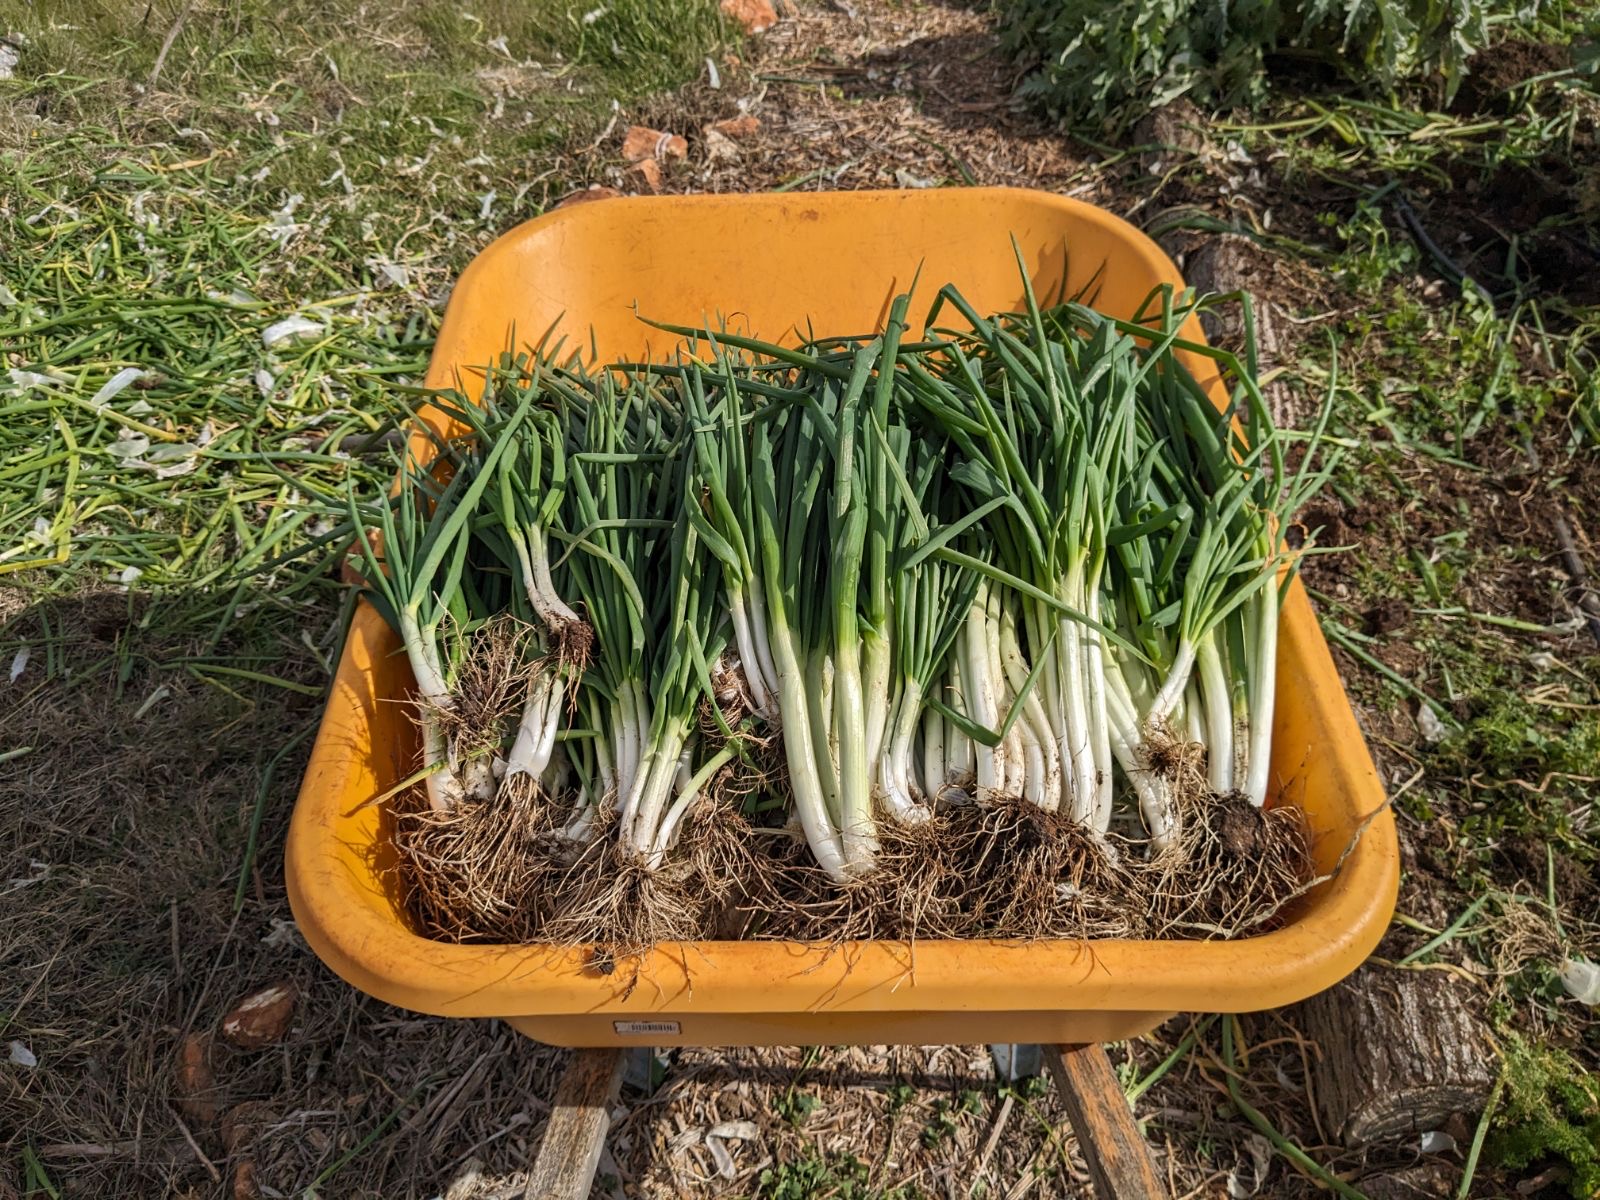 A yellow wheelbarrow filled with freshly harvested bunching green onions